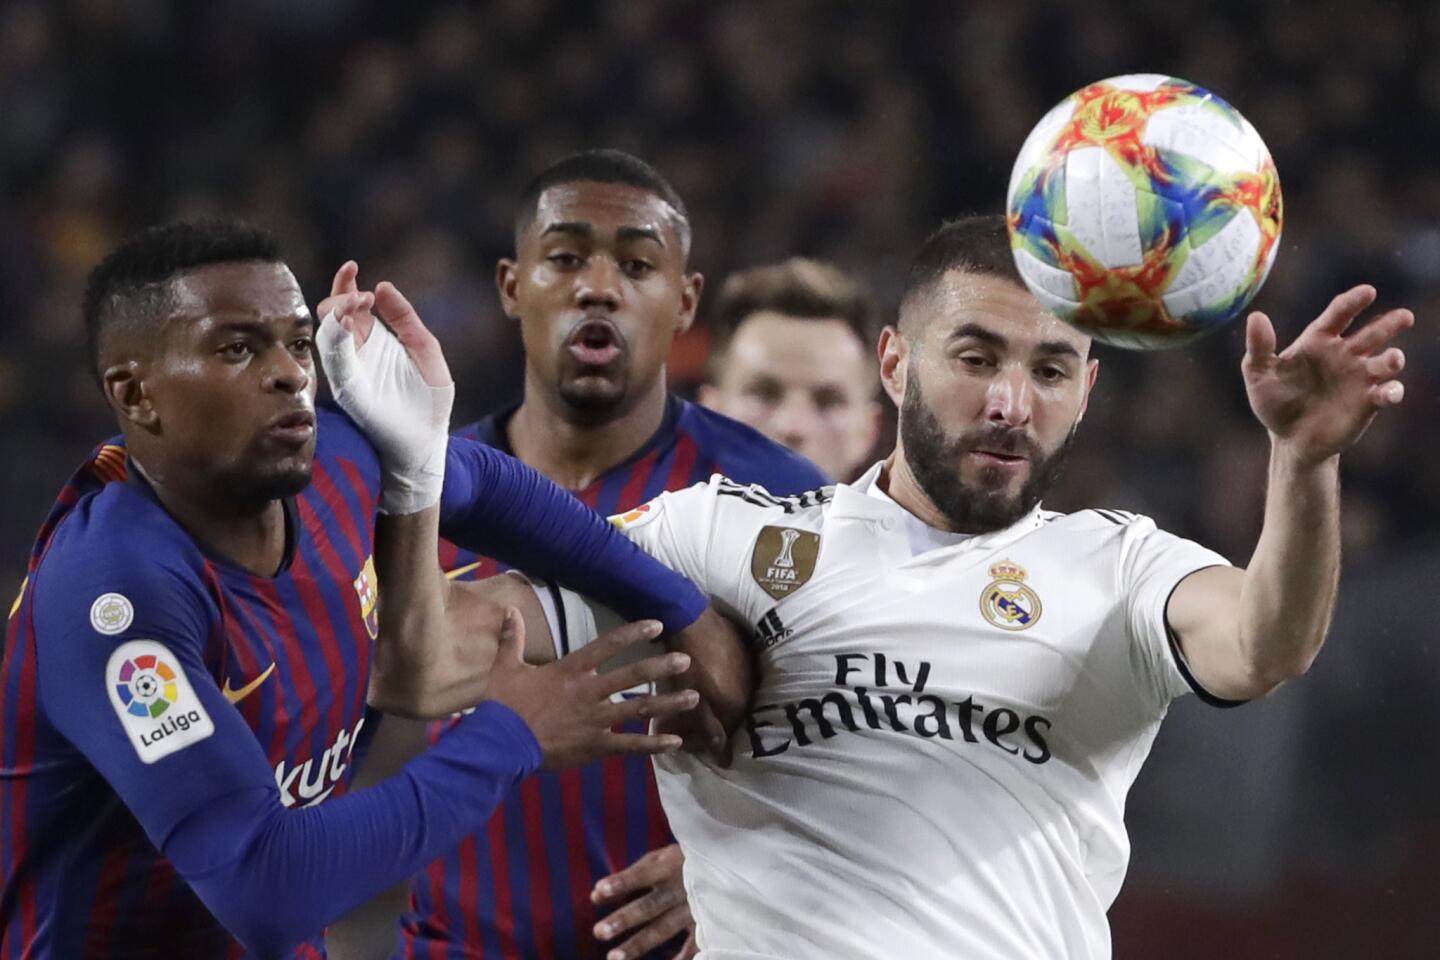 Barcelona defender Nelson Semedo uses his arms to prevent Real forward Karim Benzema from accepting a high ball during the Copa del Rey semifinal first leg soccer match between FC Barcelona and Real Madrid at the Camp Nou stadium in Barcelona, Spain, Wednesday Feb. 6, 2019. (AP Photo/Emilio Morenatti)